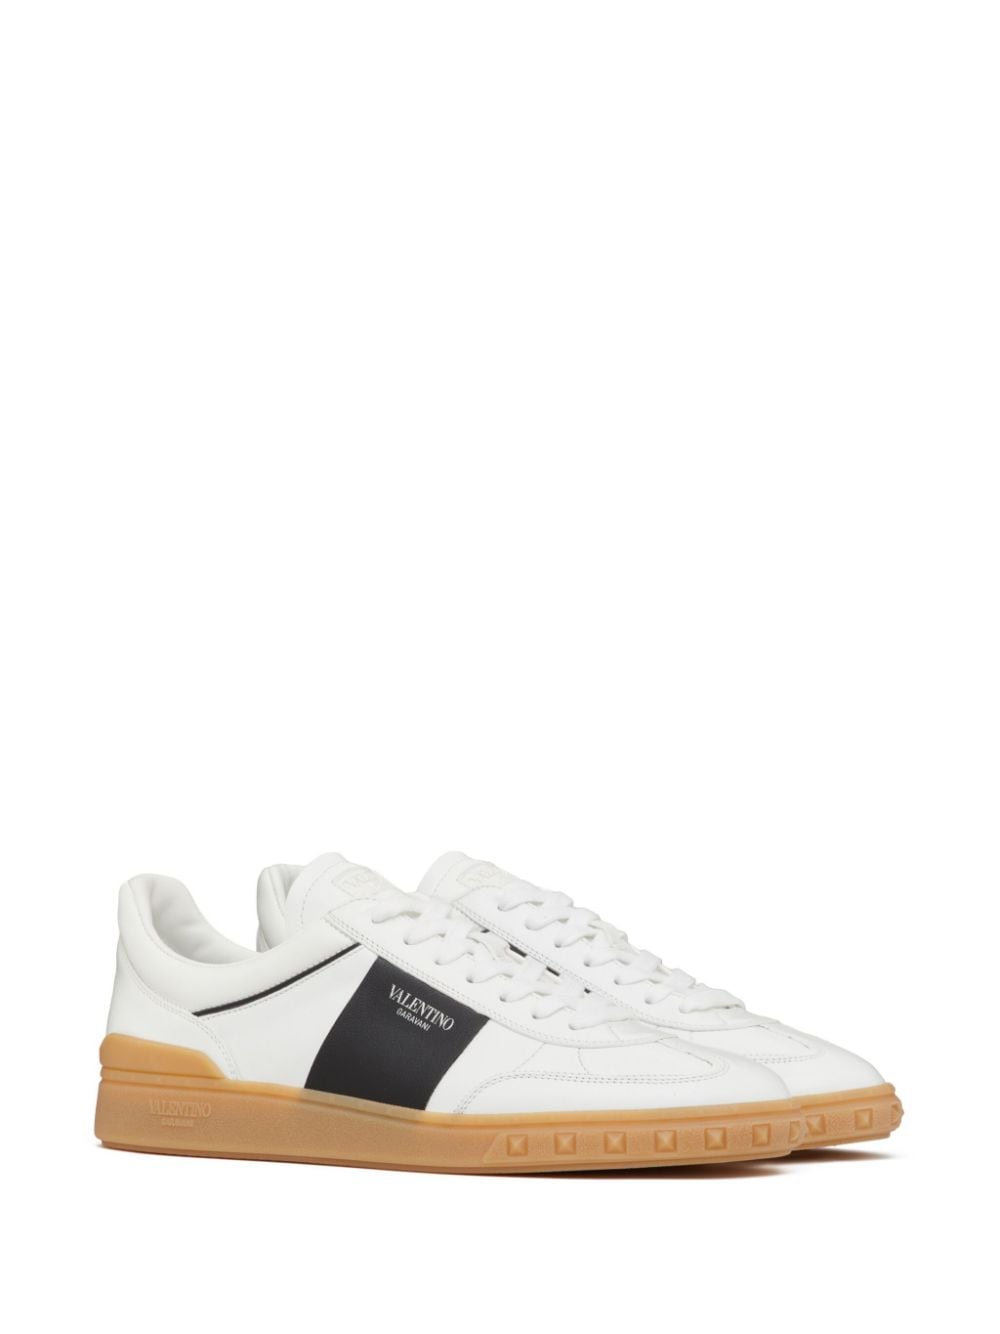 Upvillage leather sneakers<BR/><BR/><BR/>